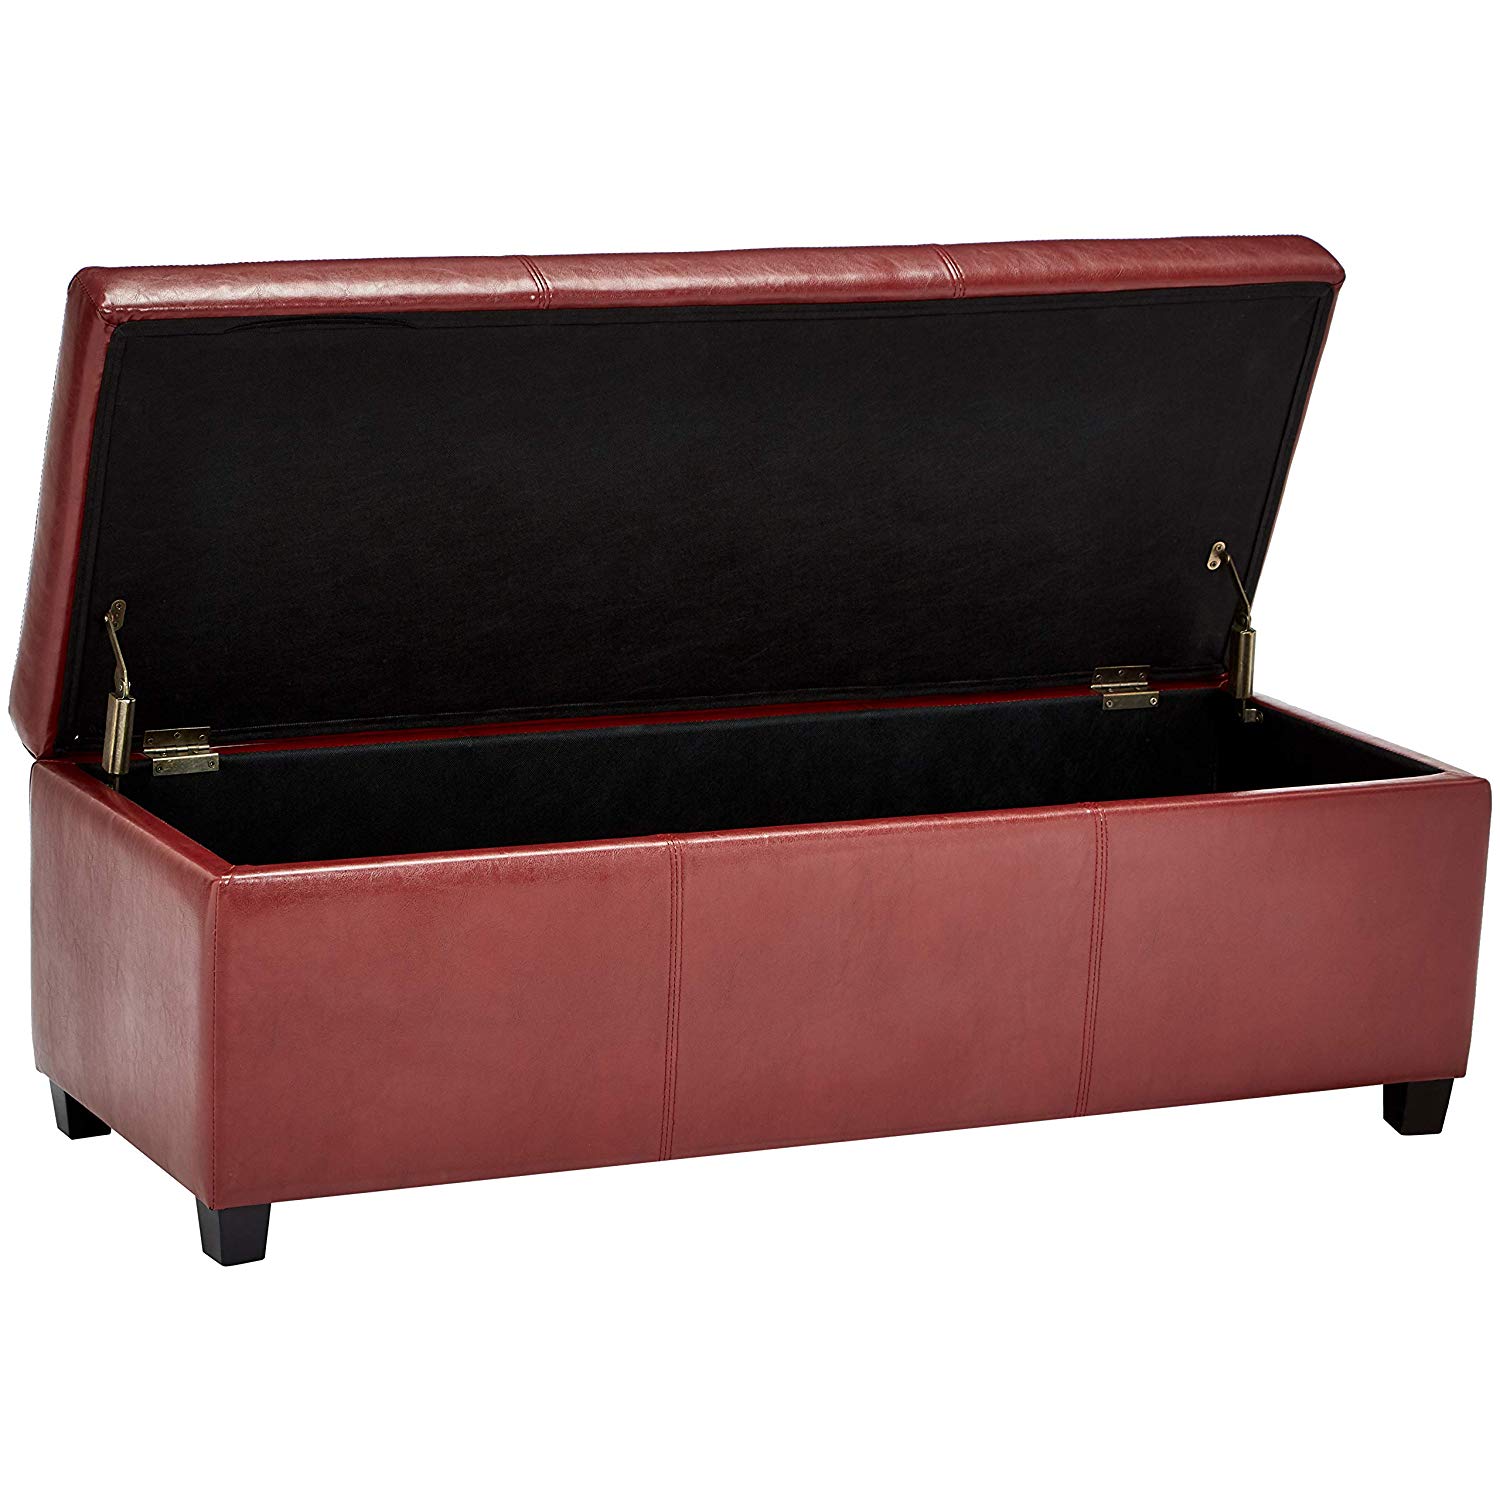 Find this ottoman on sale in multiple colors including Midnight Black, Radicchio Red, and Slate Grey (Photo via Amazon)